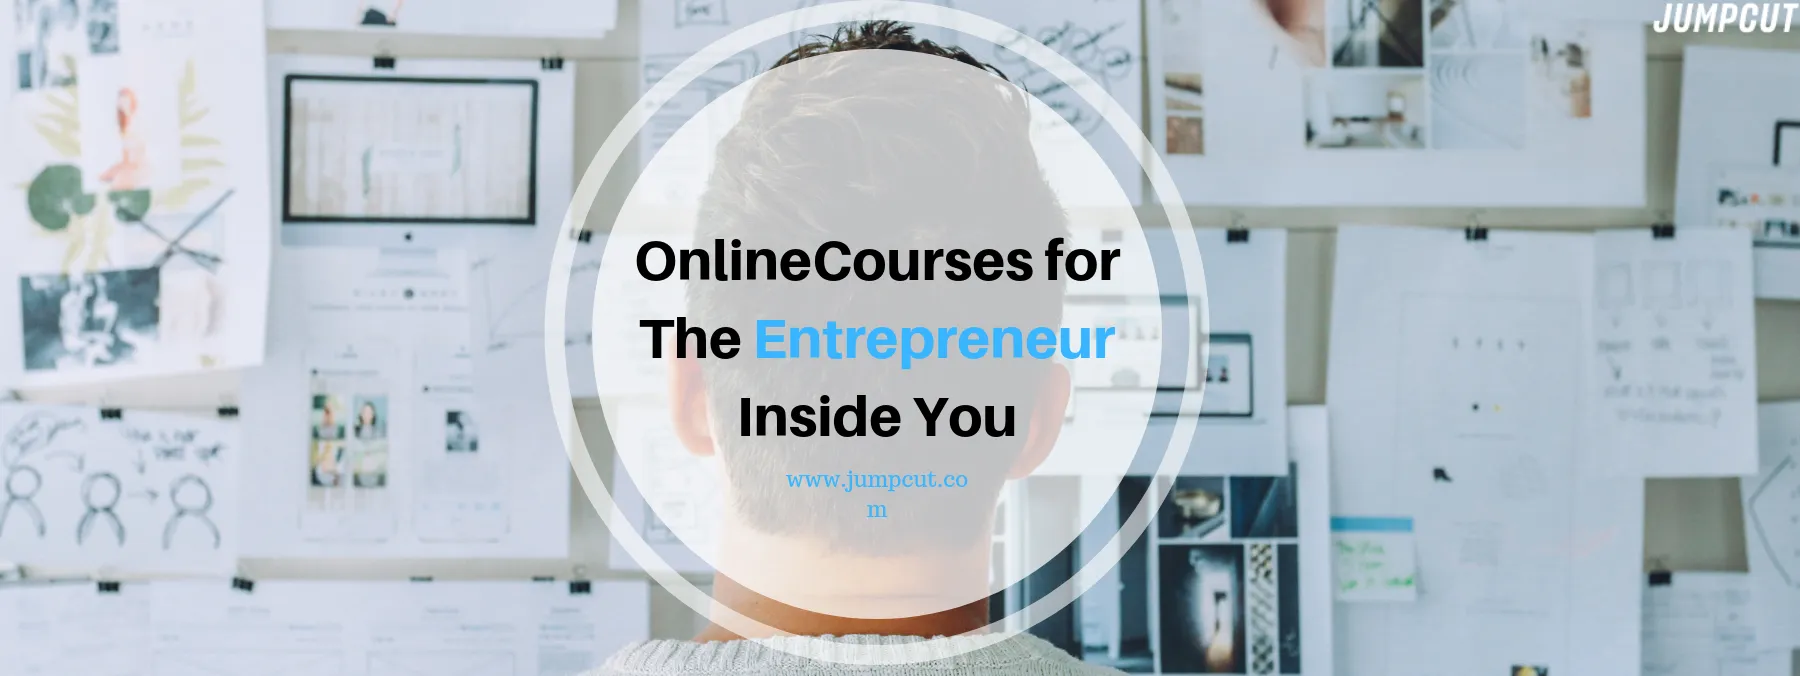 Mind-Blowing & Life-Changing Online Courses For The Entrepreneur in You